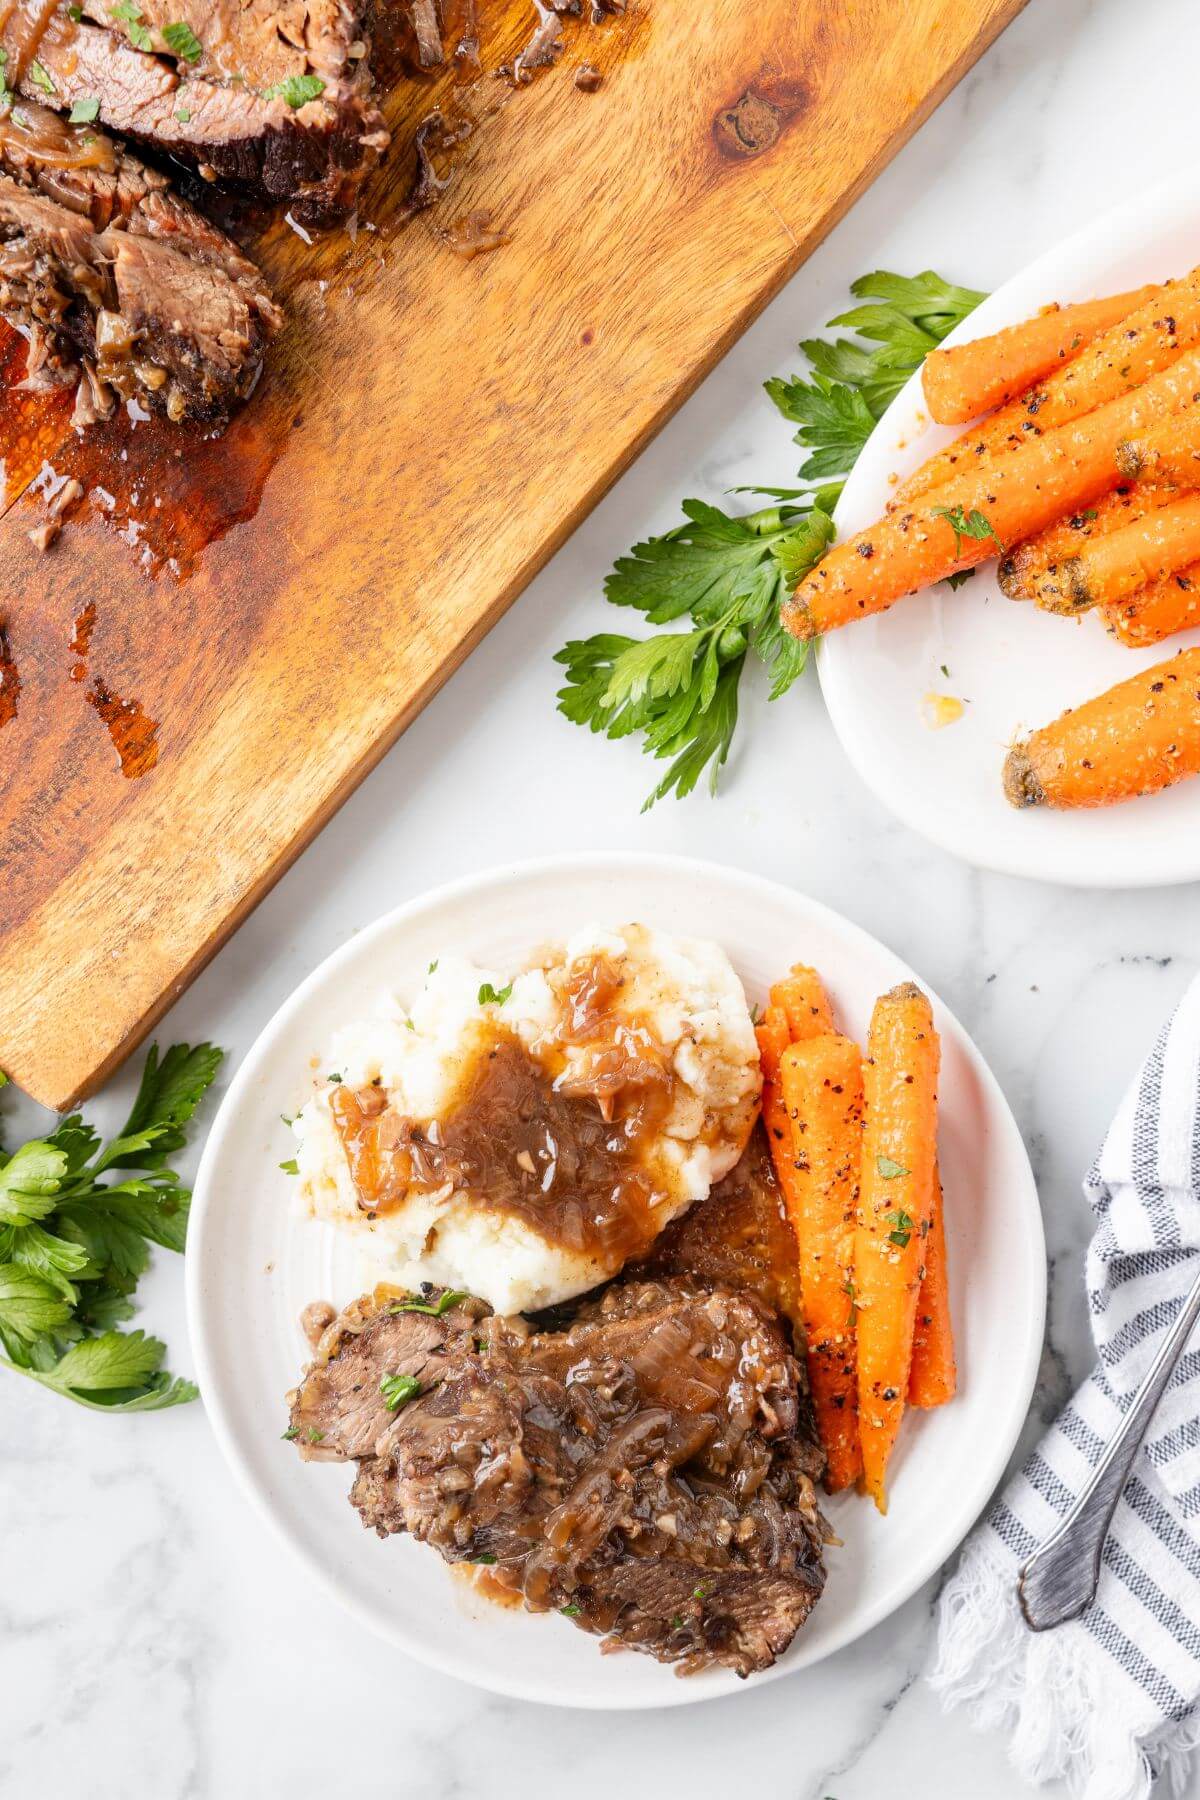 Cooked carrots and brisket are served alongside mashed potatoes and gravy.